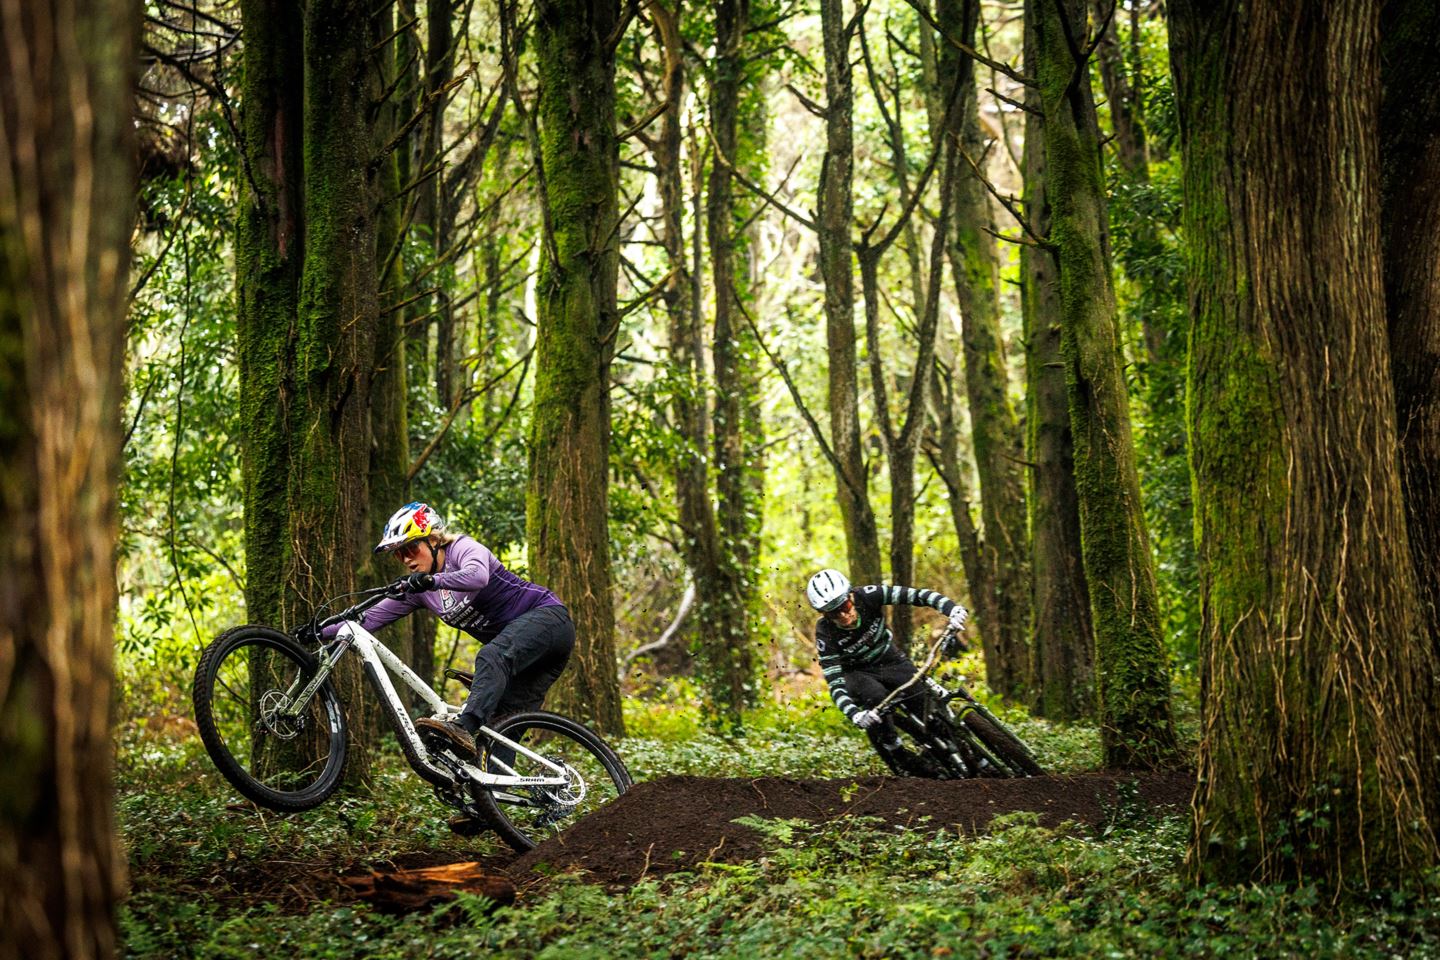 Vali Höll wheeling on loamy trail with Cécile Ravanel trailing behind her in Sintra, Portugal.